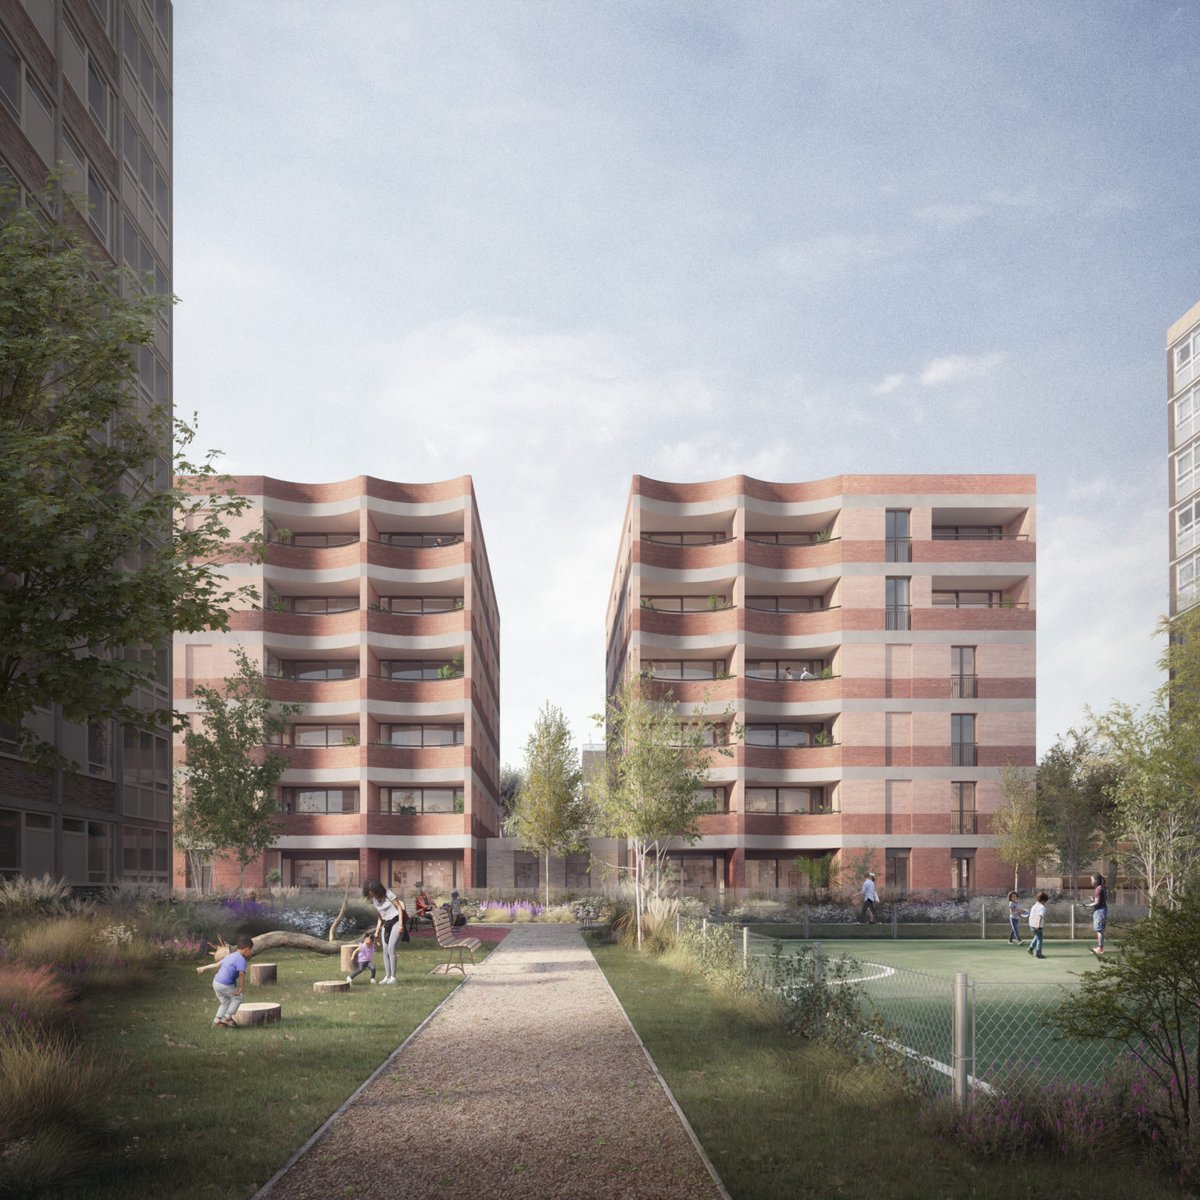 We are working in partnership with @hackneycouncil to deliver much needed affordable housing at Wimbourne Street and Buckland Street. Creating 113 new mixed tenure homes plus public realm these two #developments form part of #Hackney's #Housing Supply Programme. #londonhousing